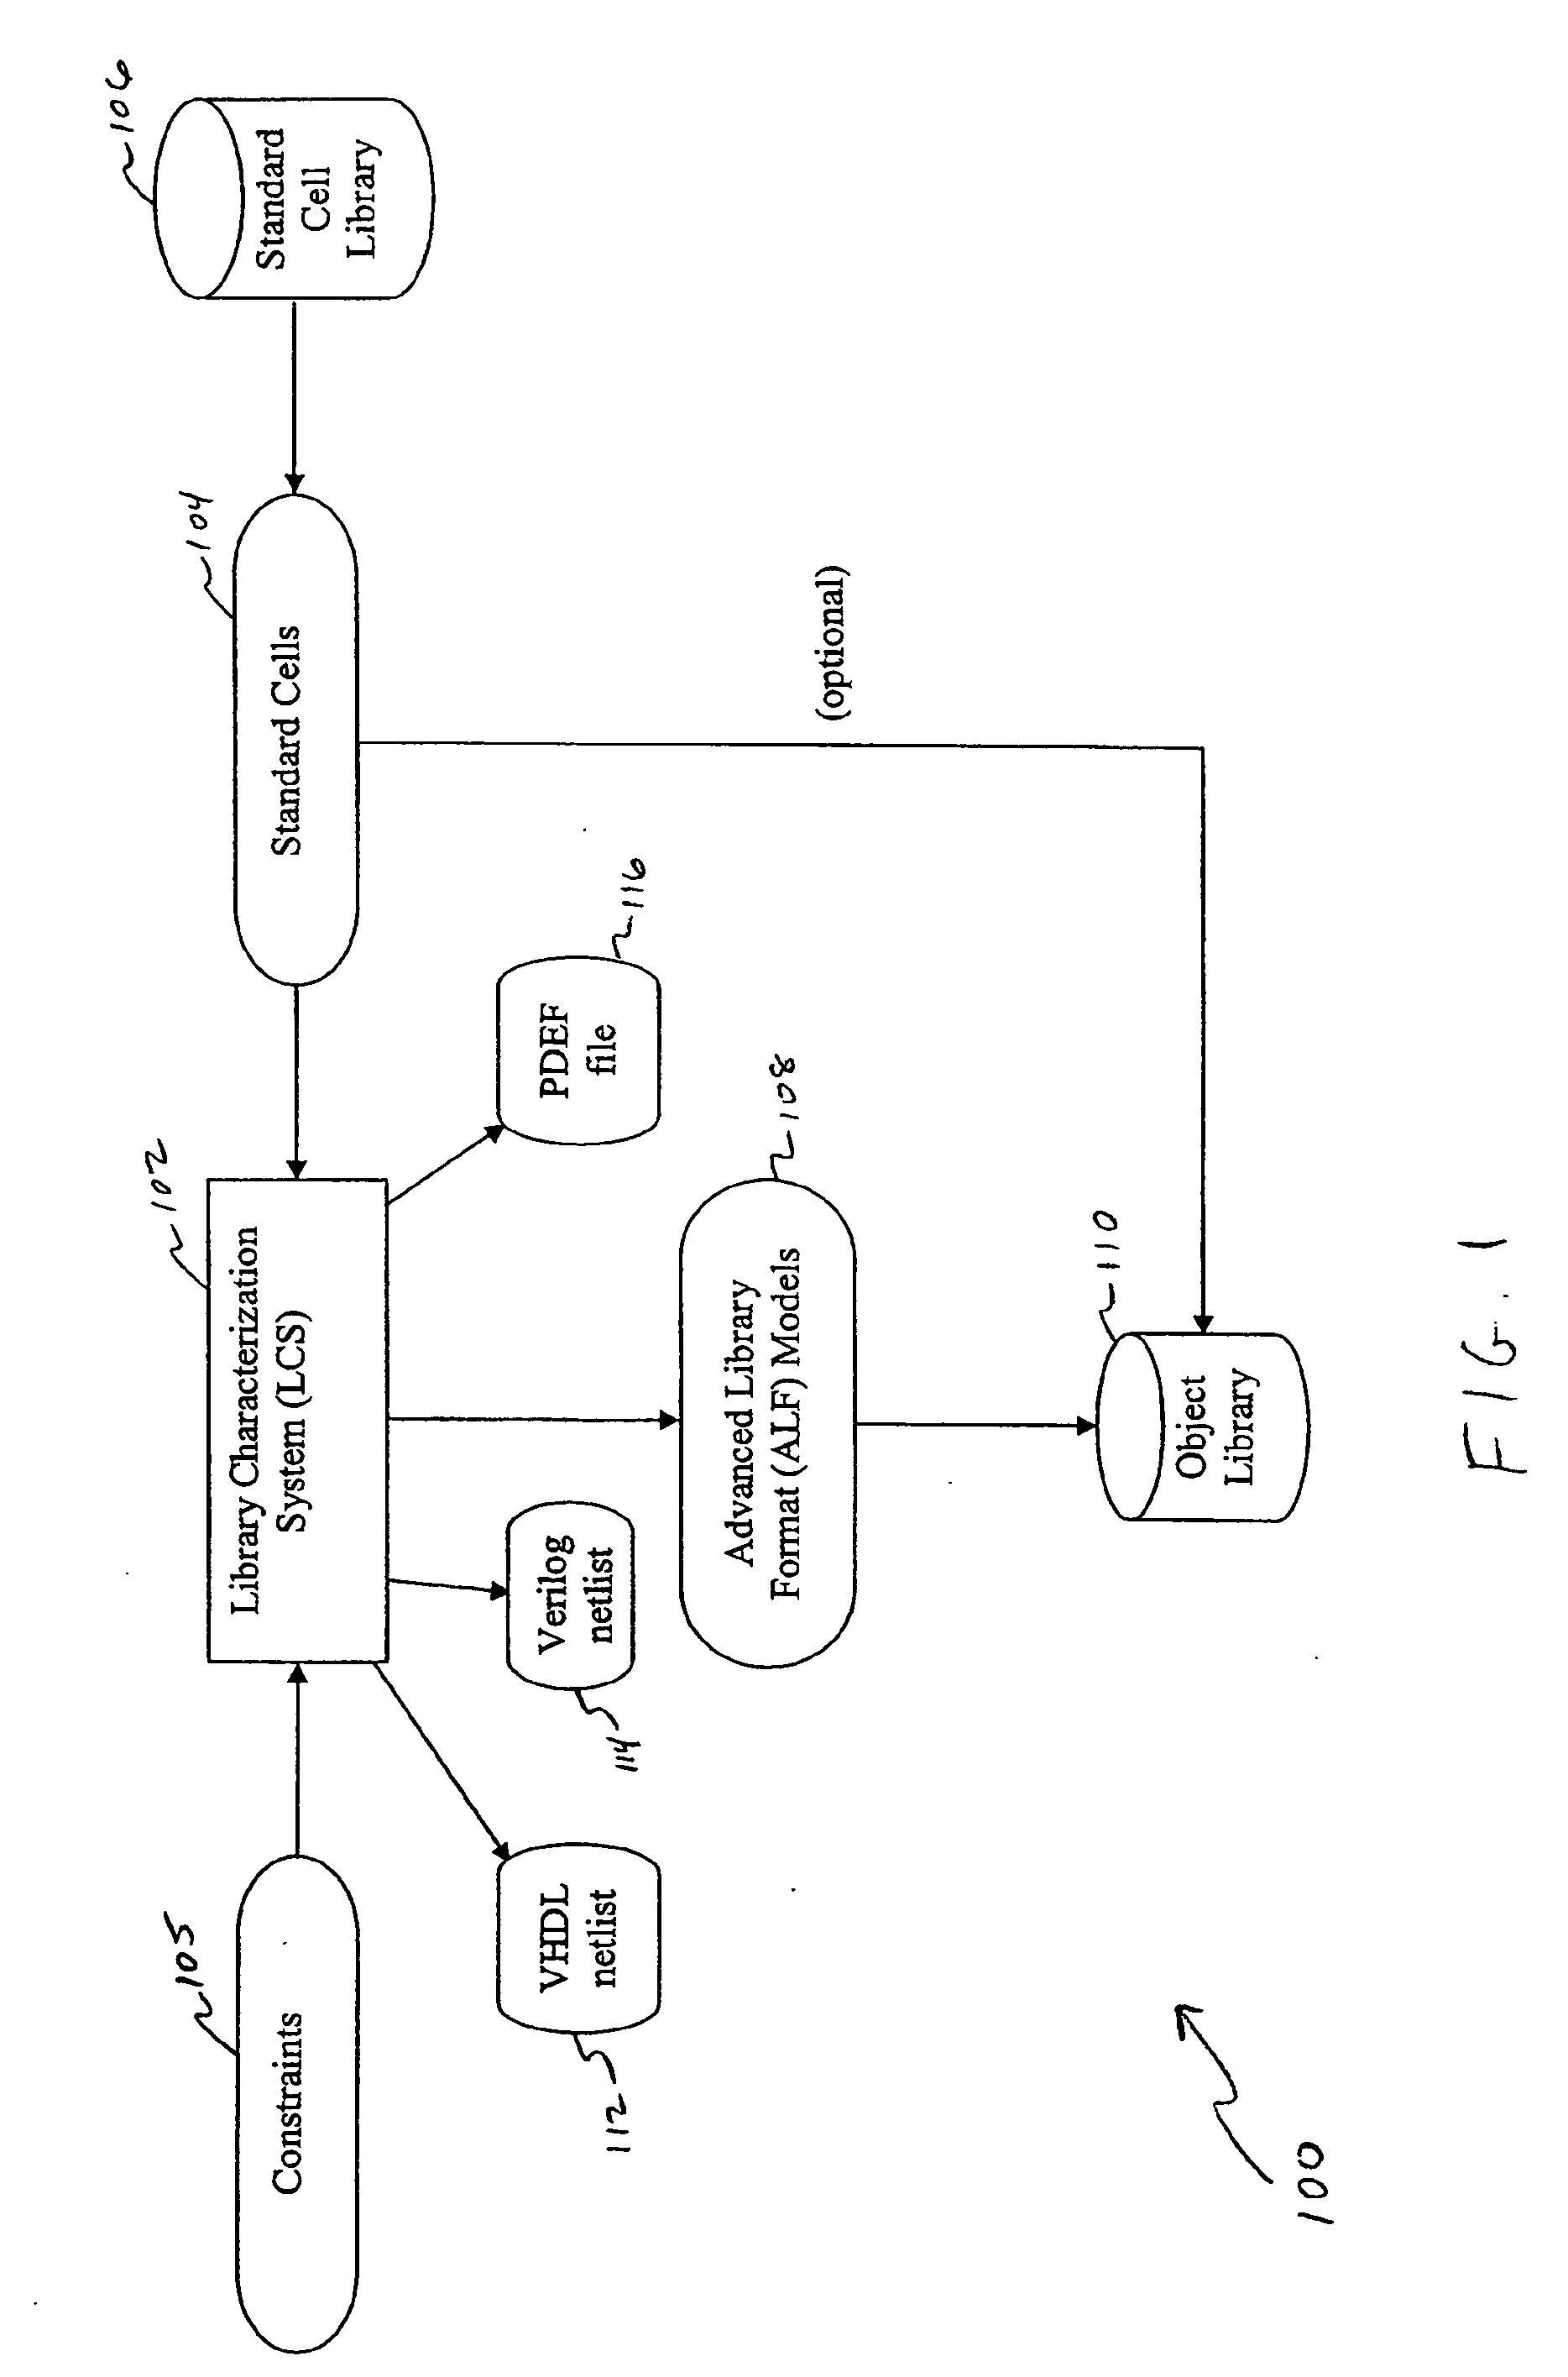 Rule-based design consultant and method for integrated circuit design